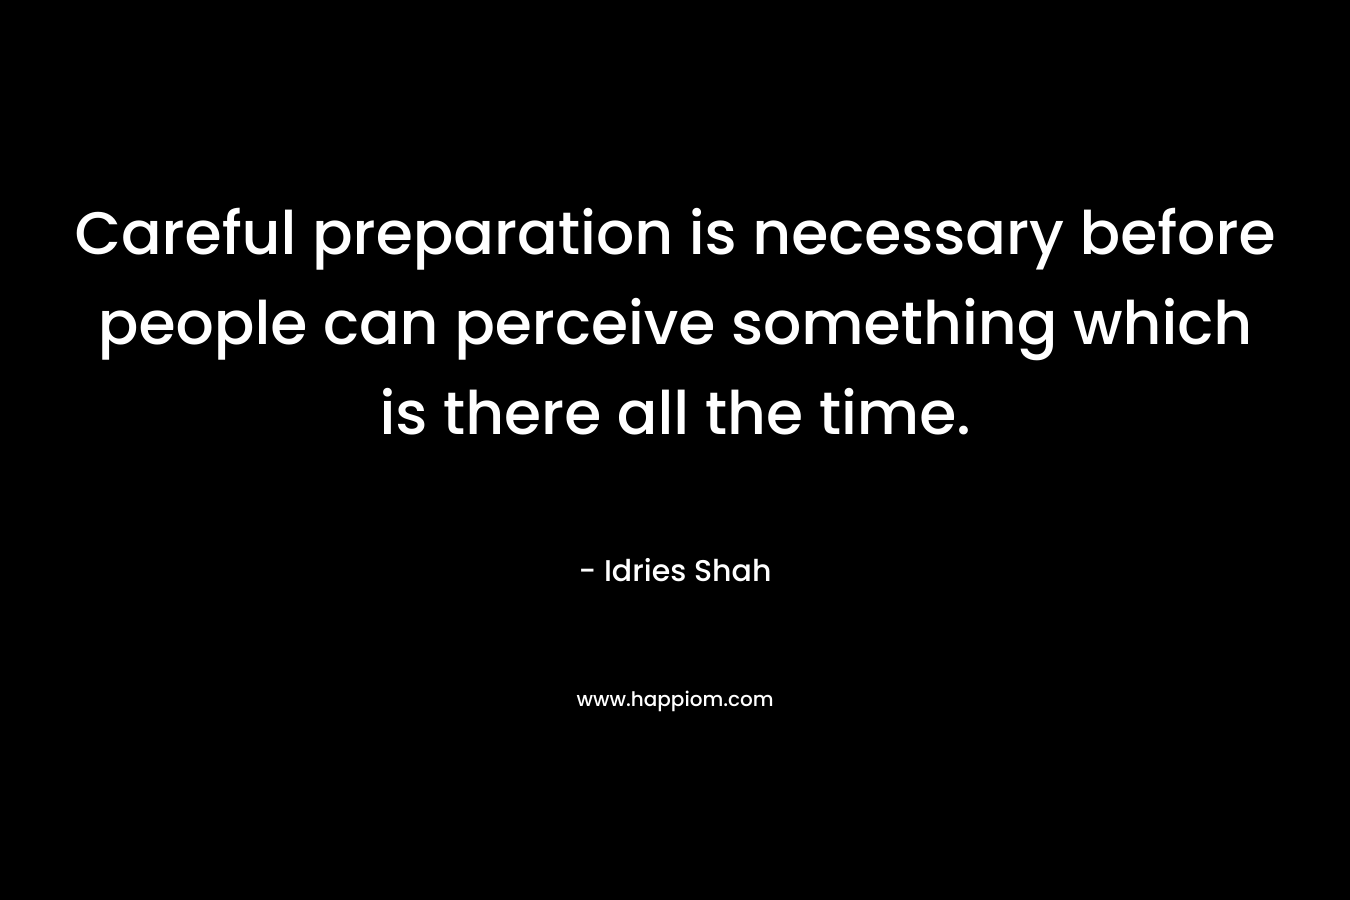 Careful preparation is necessary before people can perceive something which is there all the time.